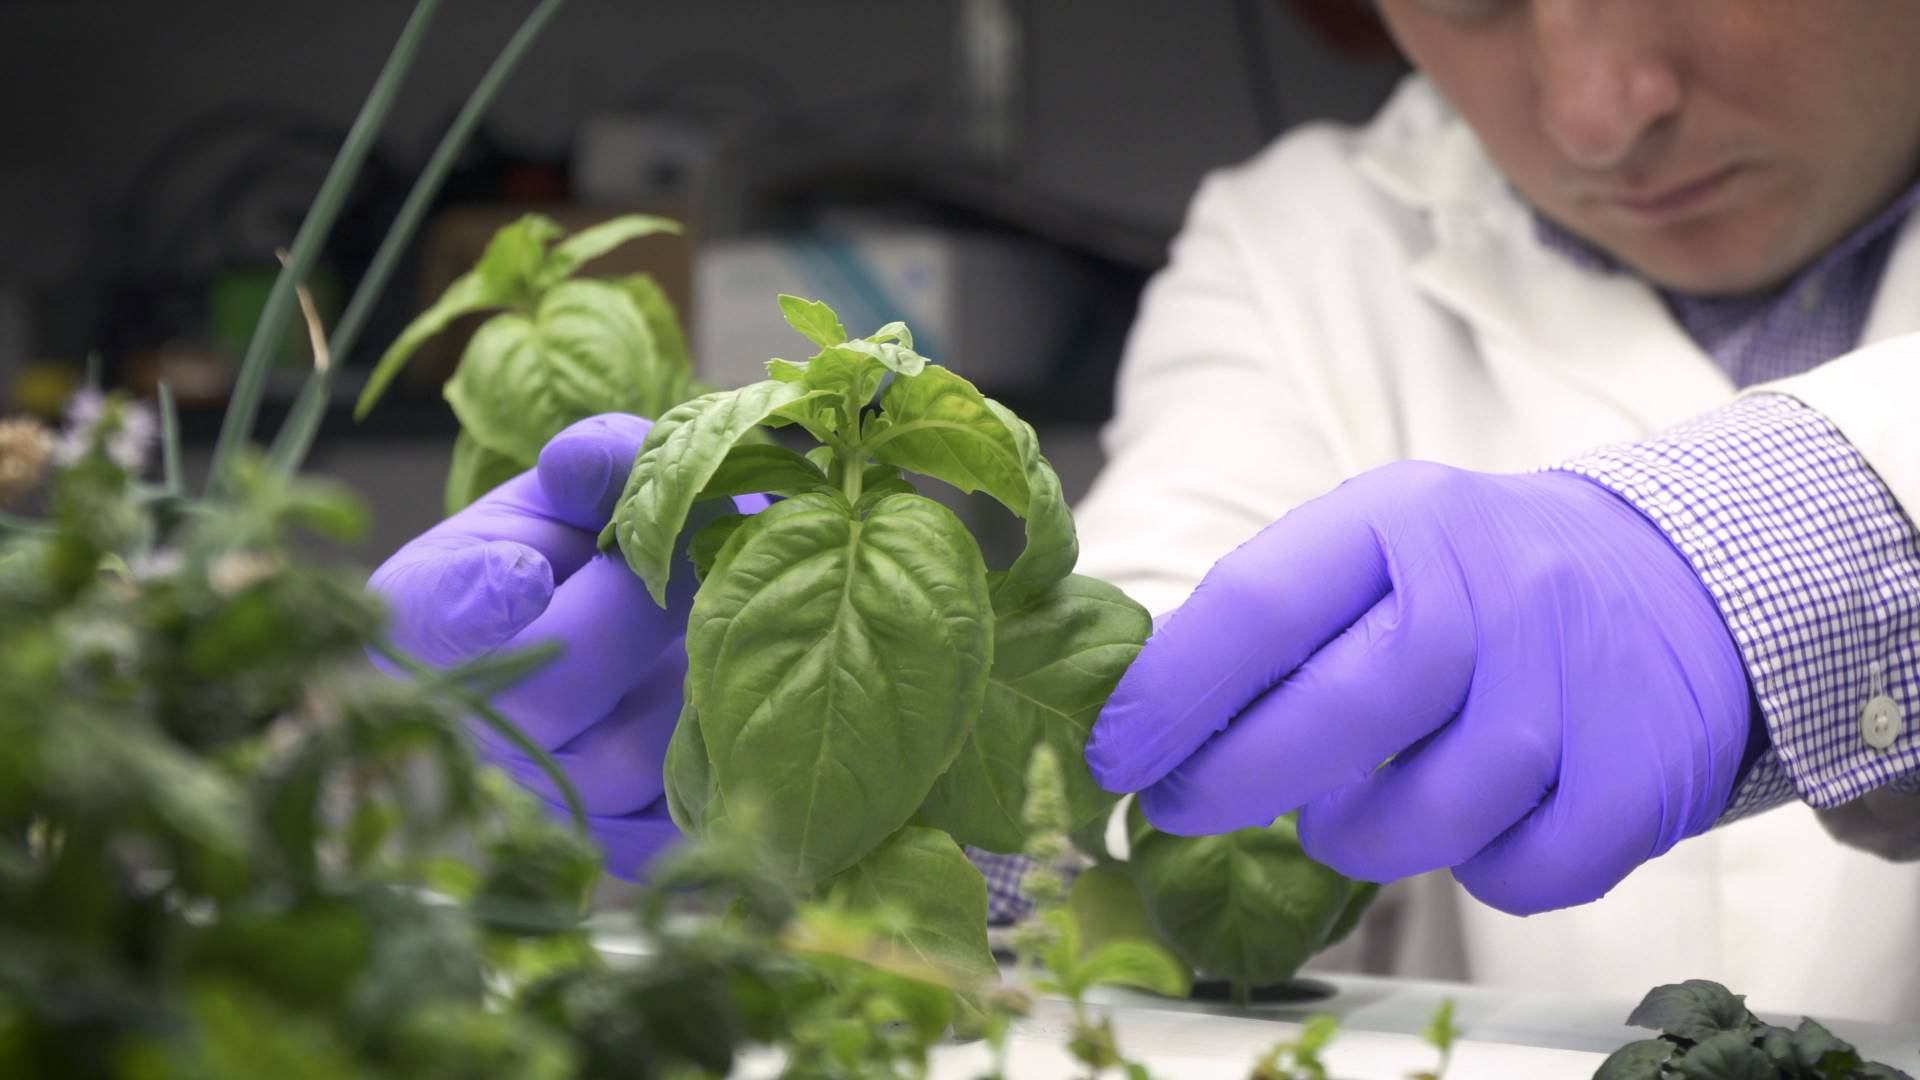 A researcher inspecting a plant